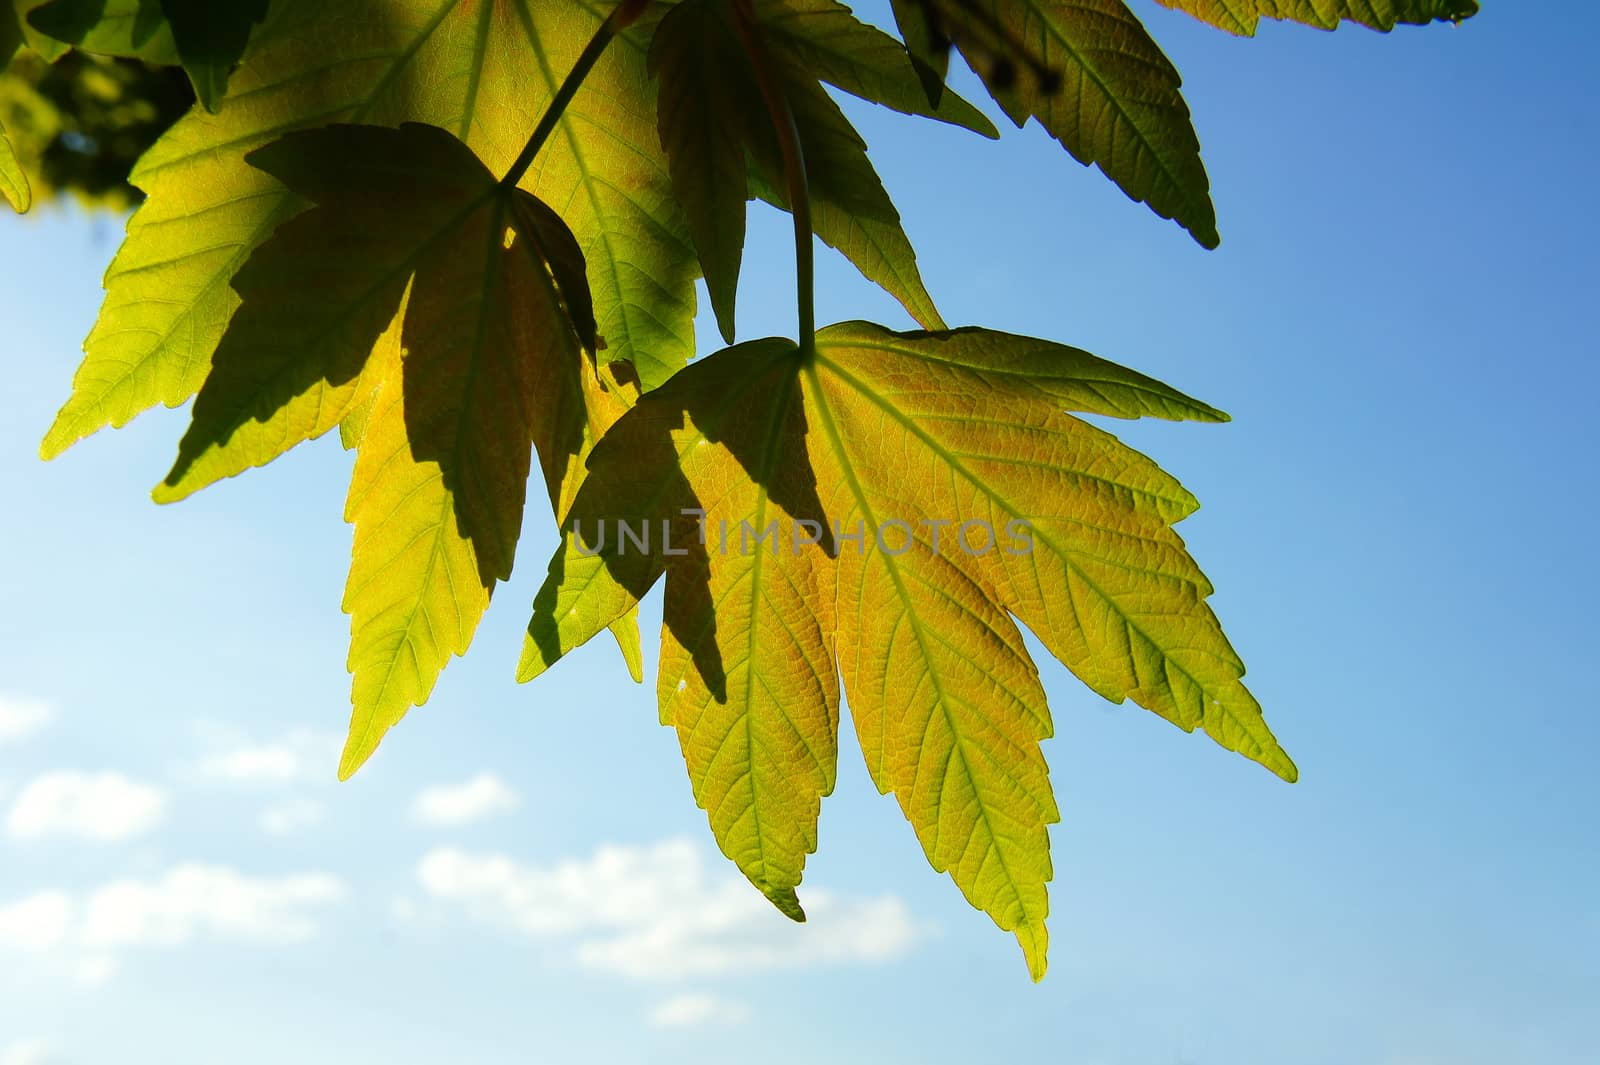 Sycamore leaves in back light